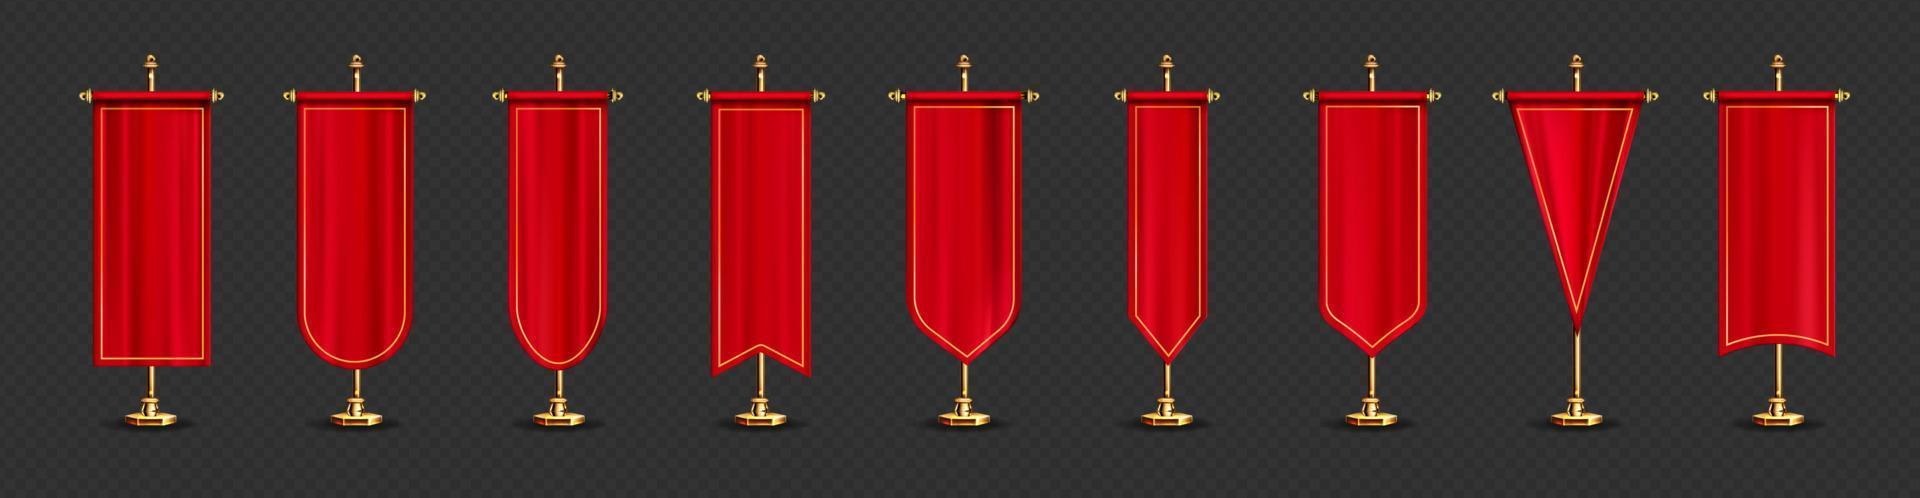 Red long pennant flags on gold stand vector